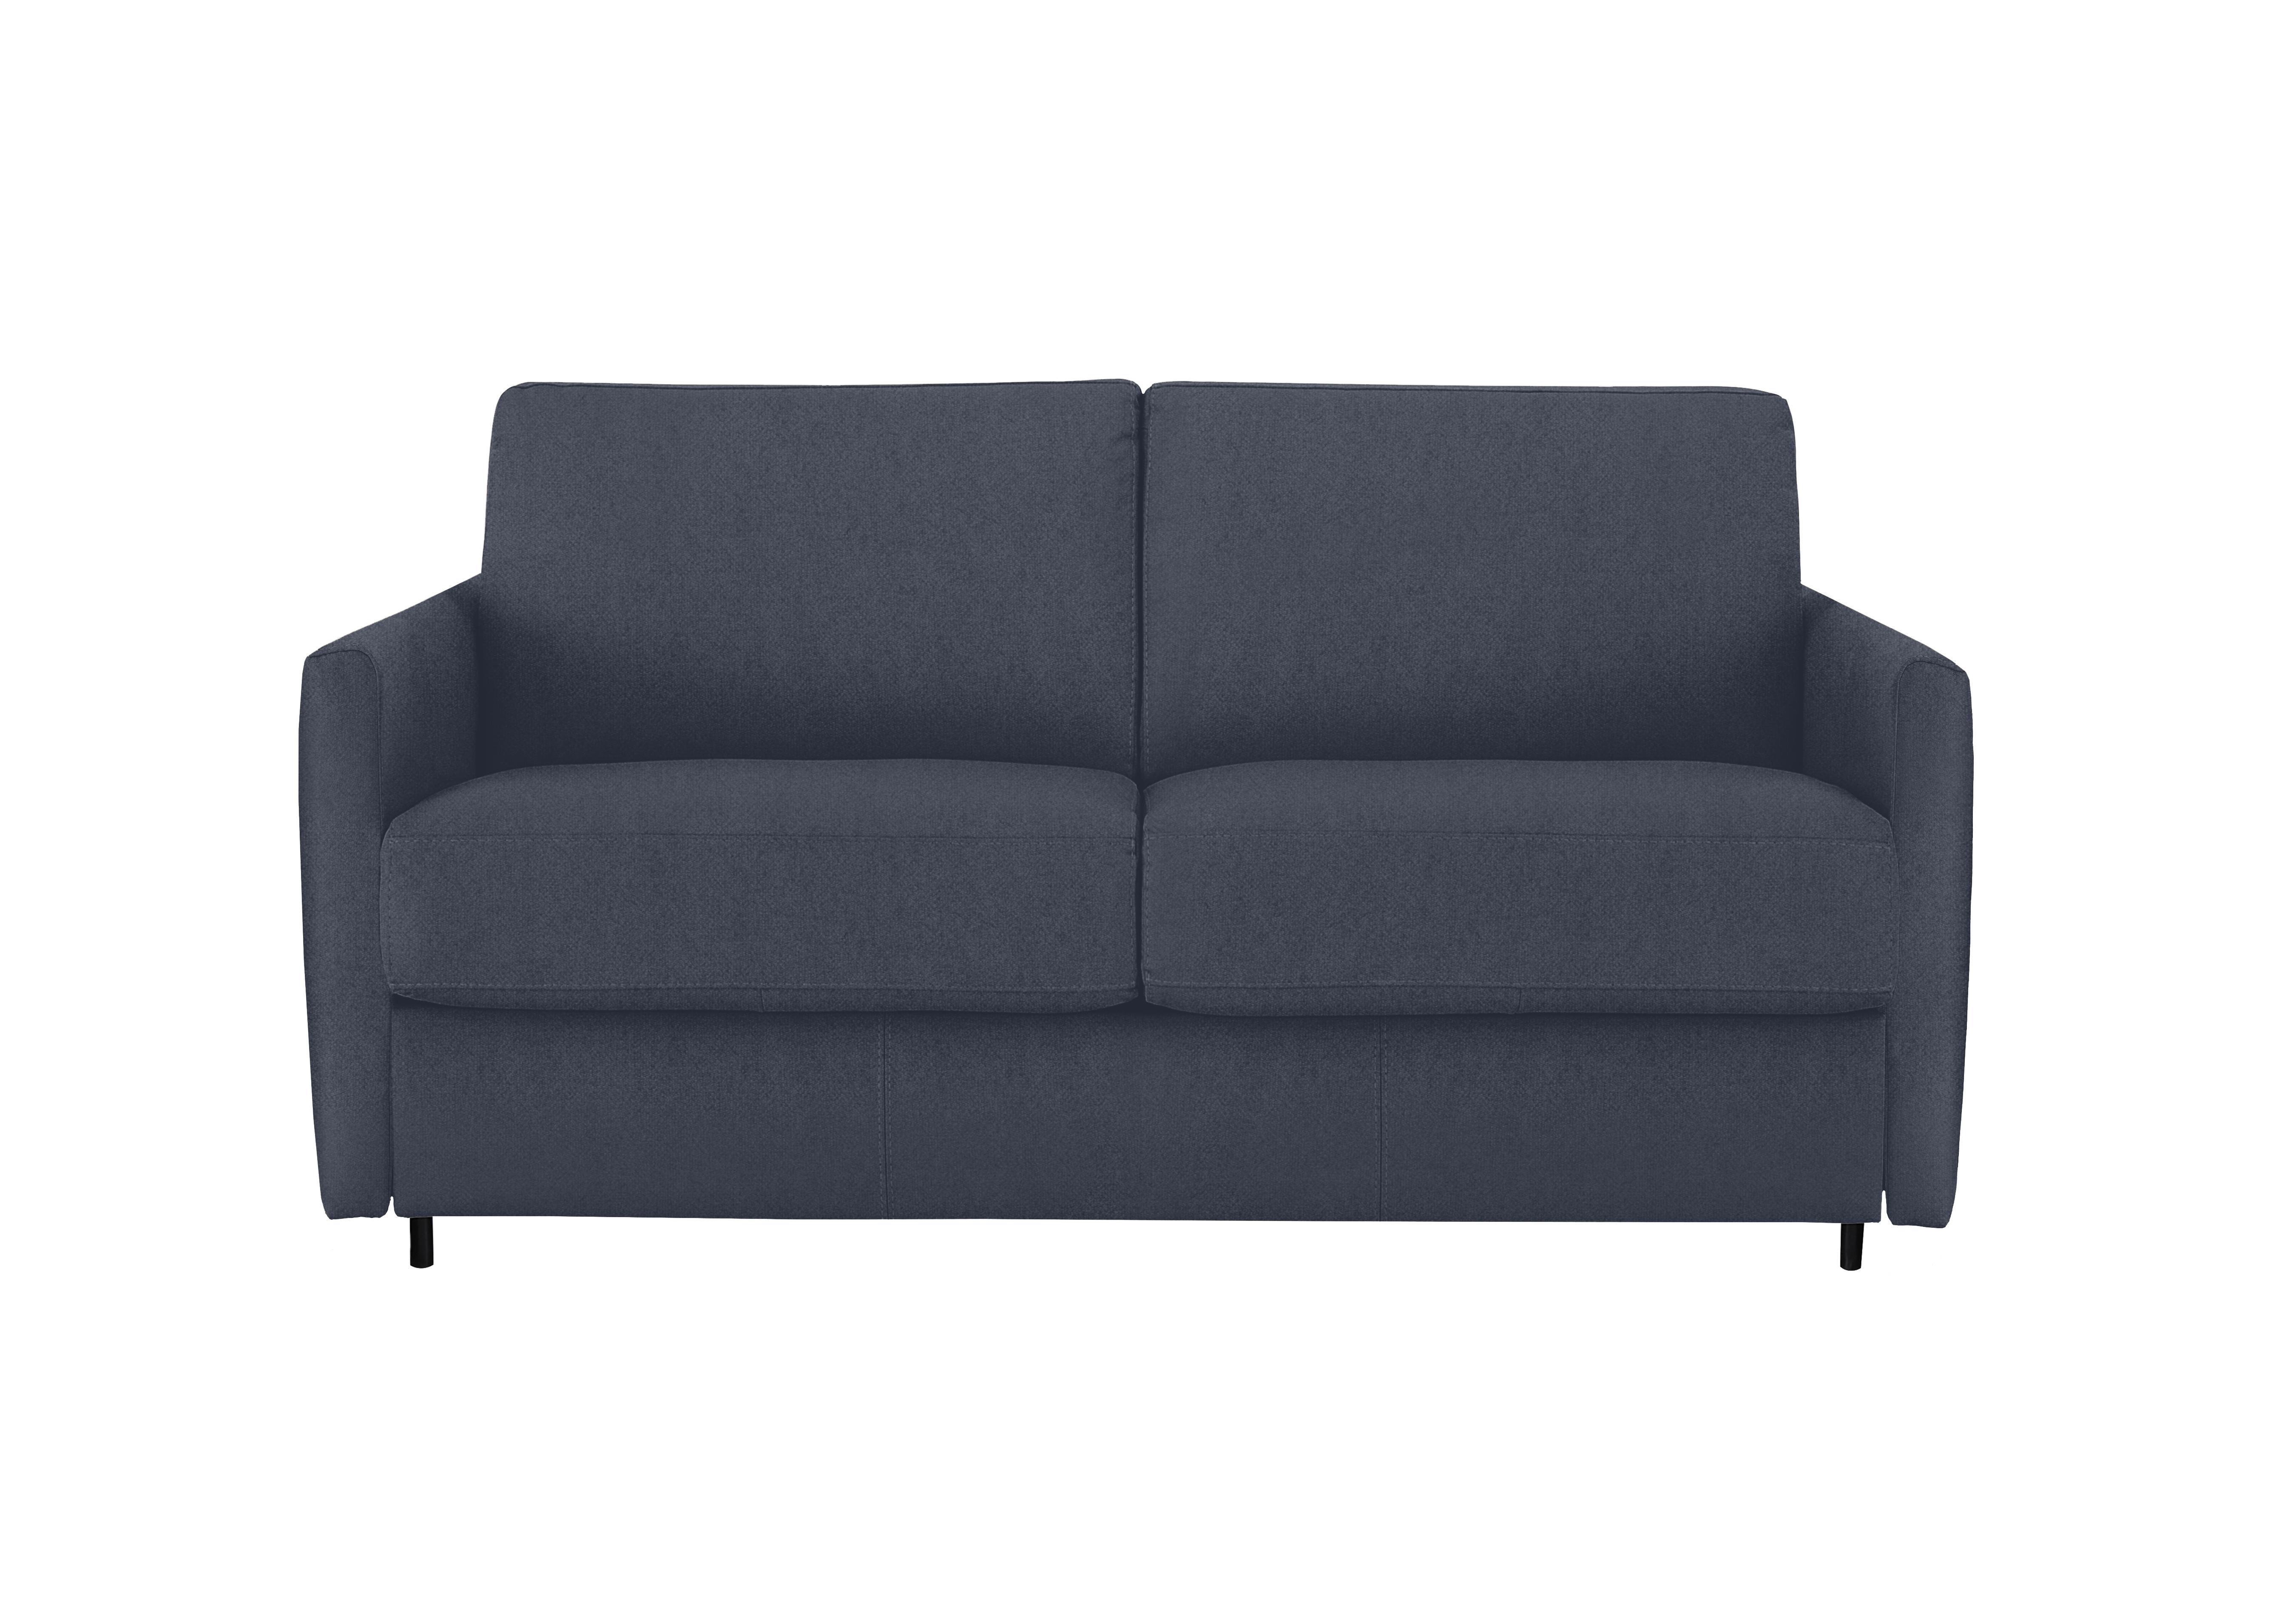 Alcova 2 Seater Fabric Sofa Bed with Slim Arms in Fuente Ocean on Furniture Village